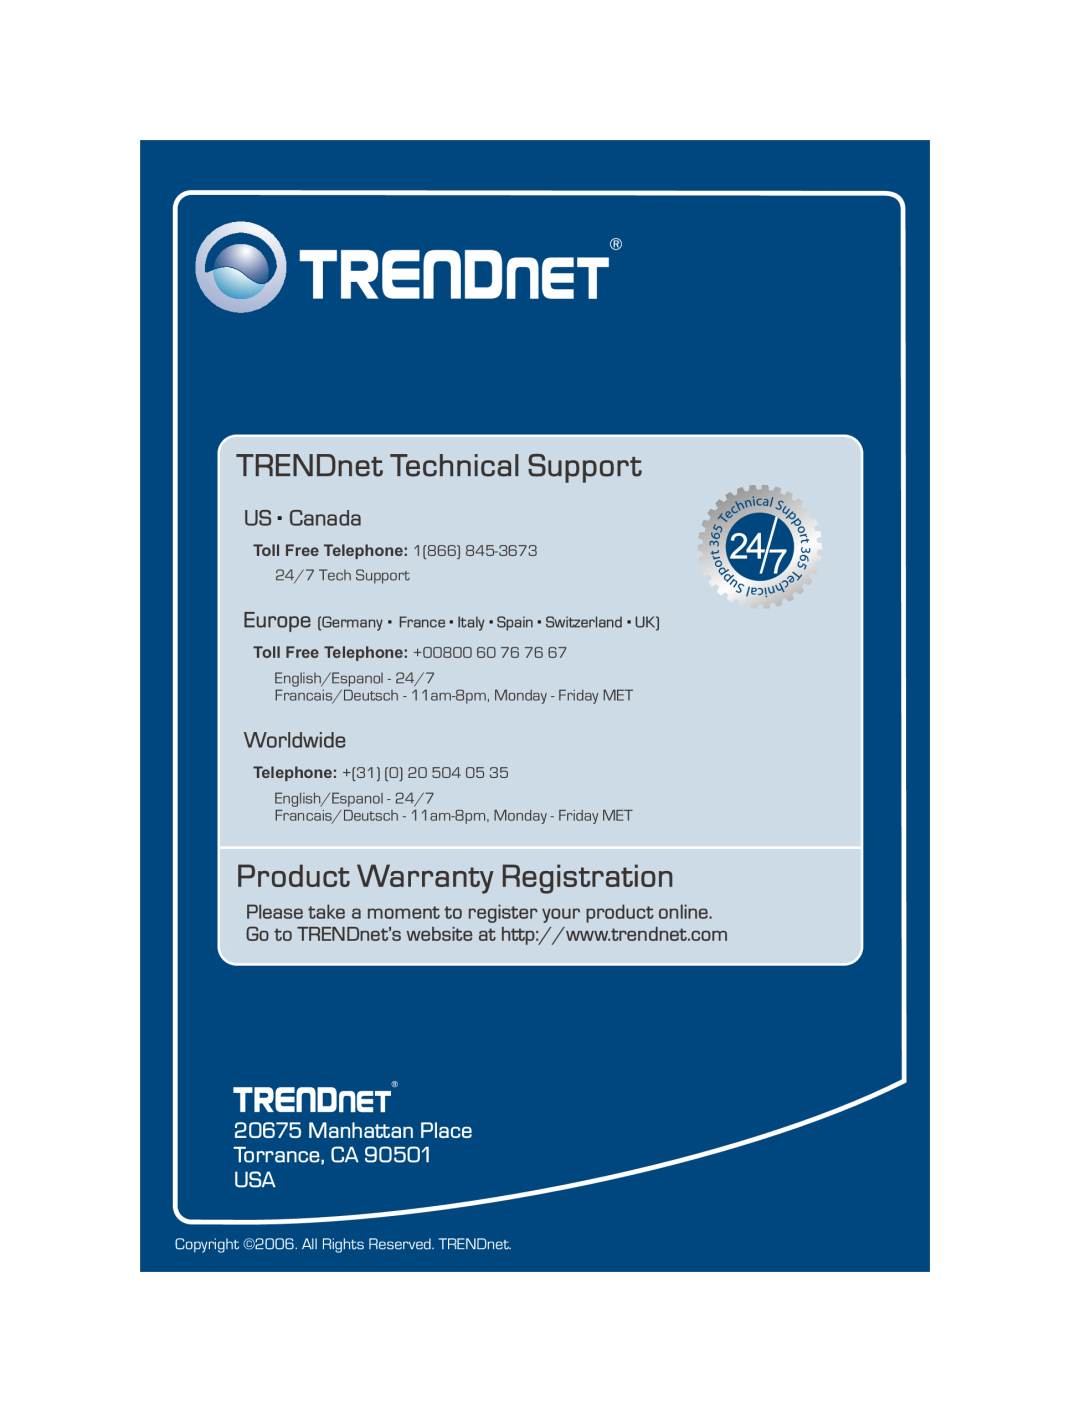 SMC Networks TE100-S8 TRENDnet Technical Support, Product Warranty Registration, US . Canada, Worldwide, 24/7 Tech Support 